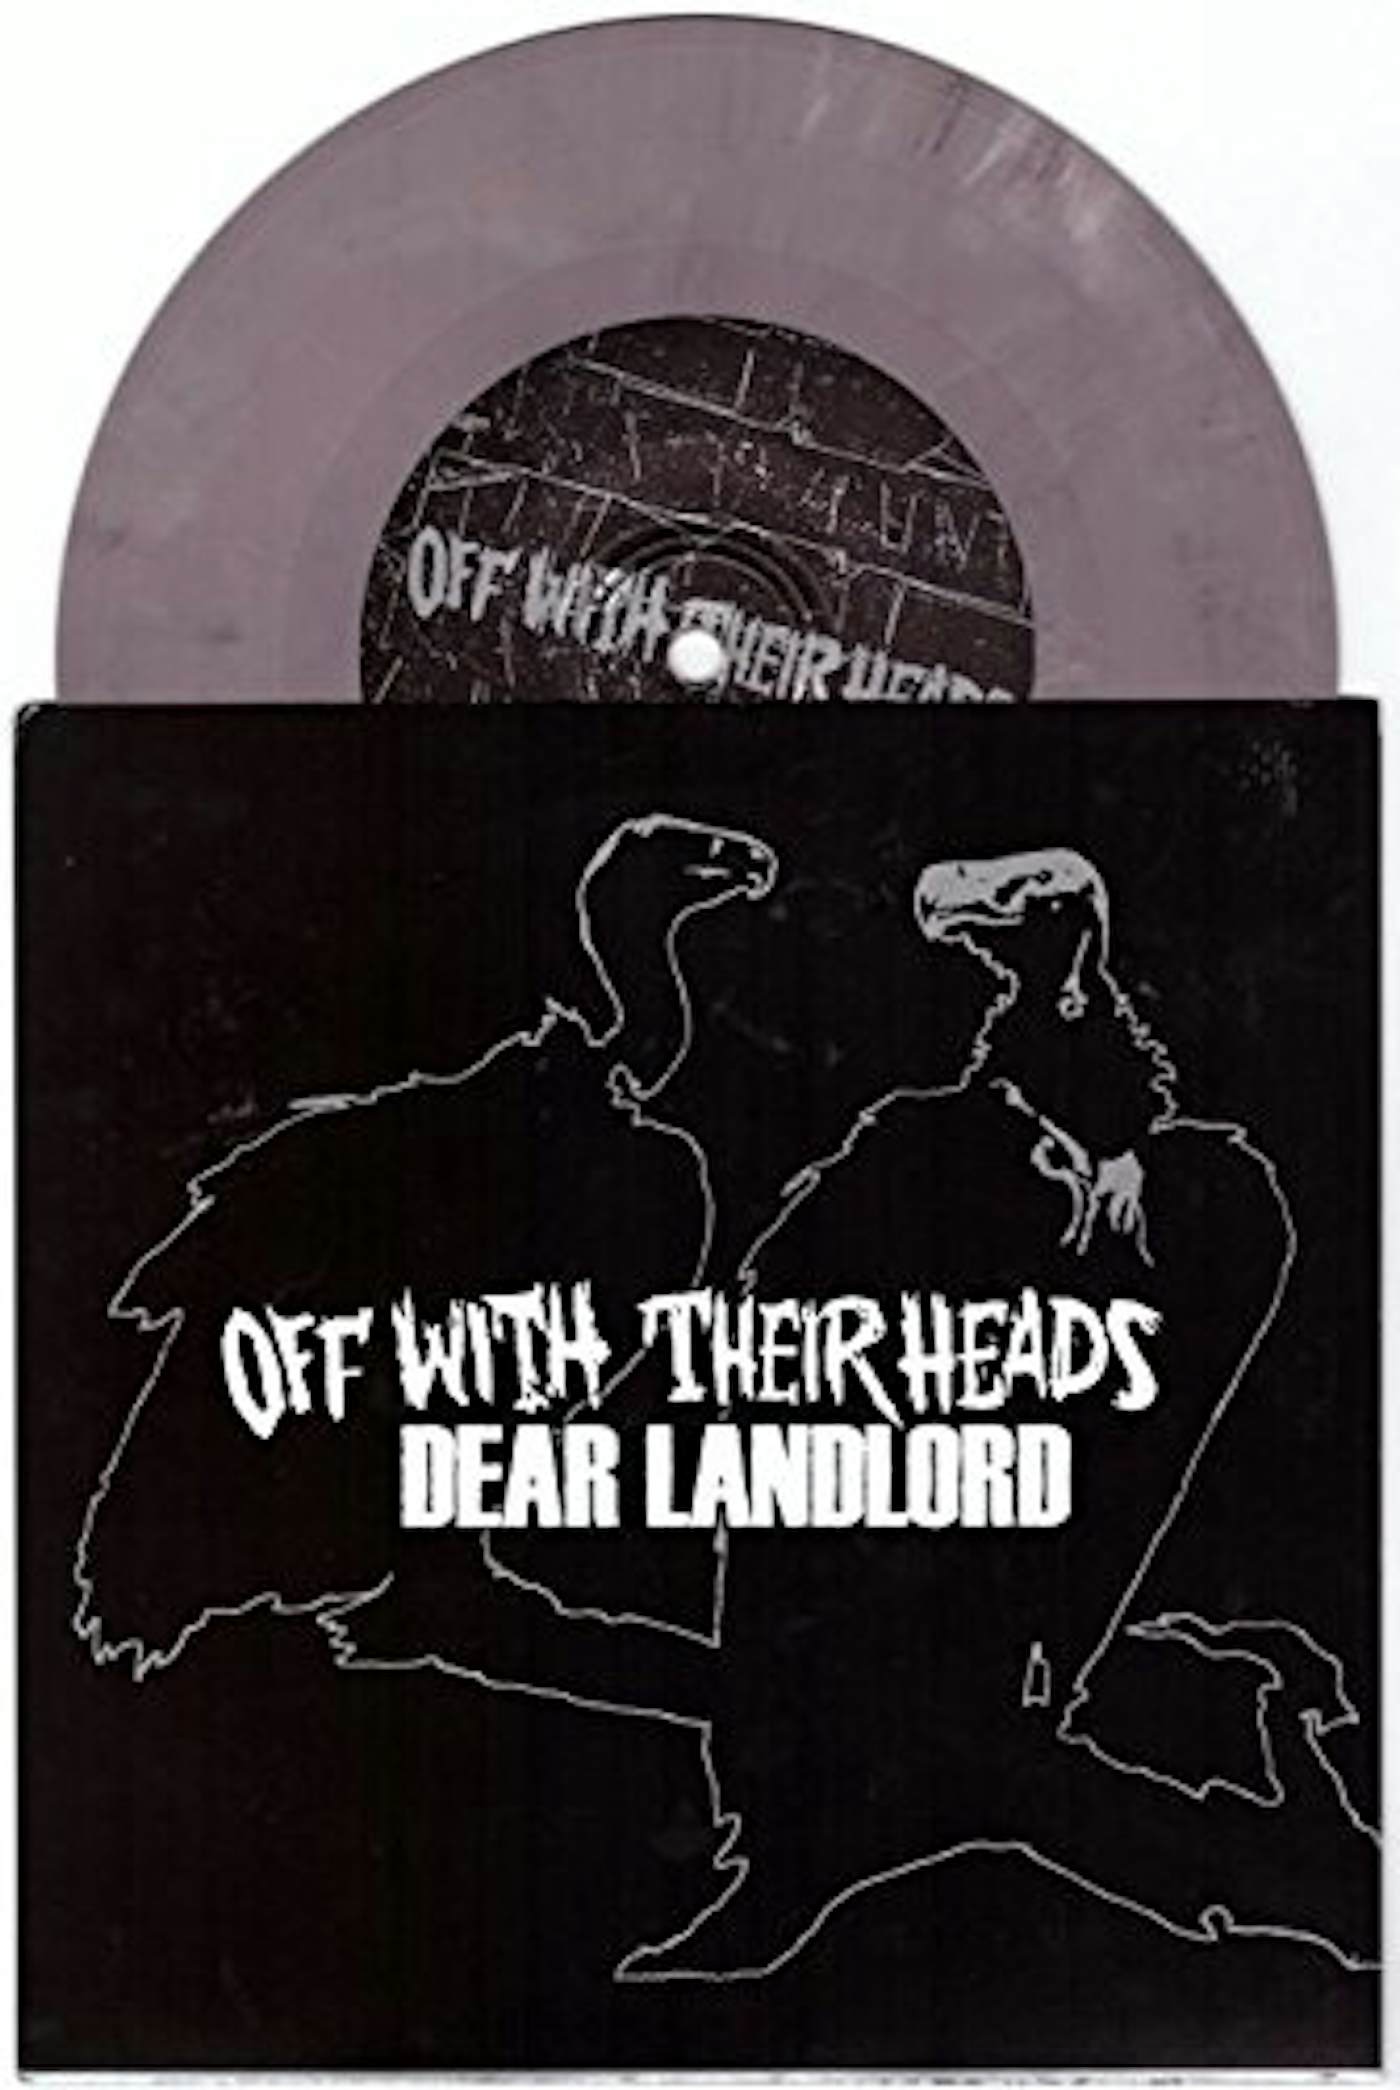 Dear Landlord / Off With Their Heads